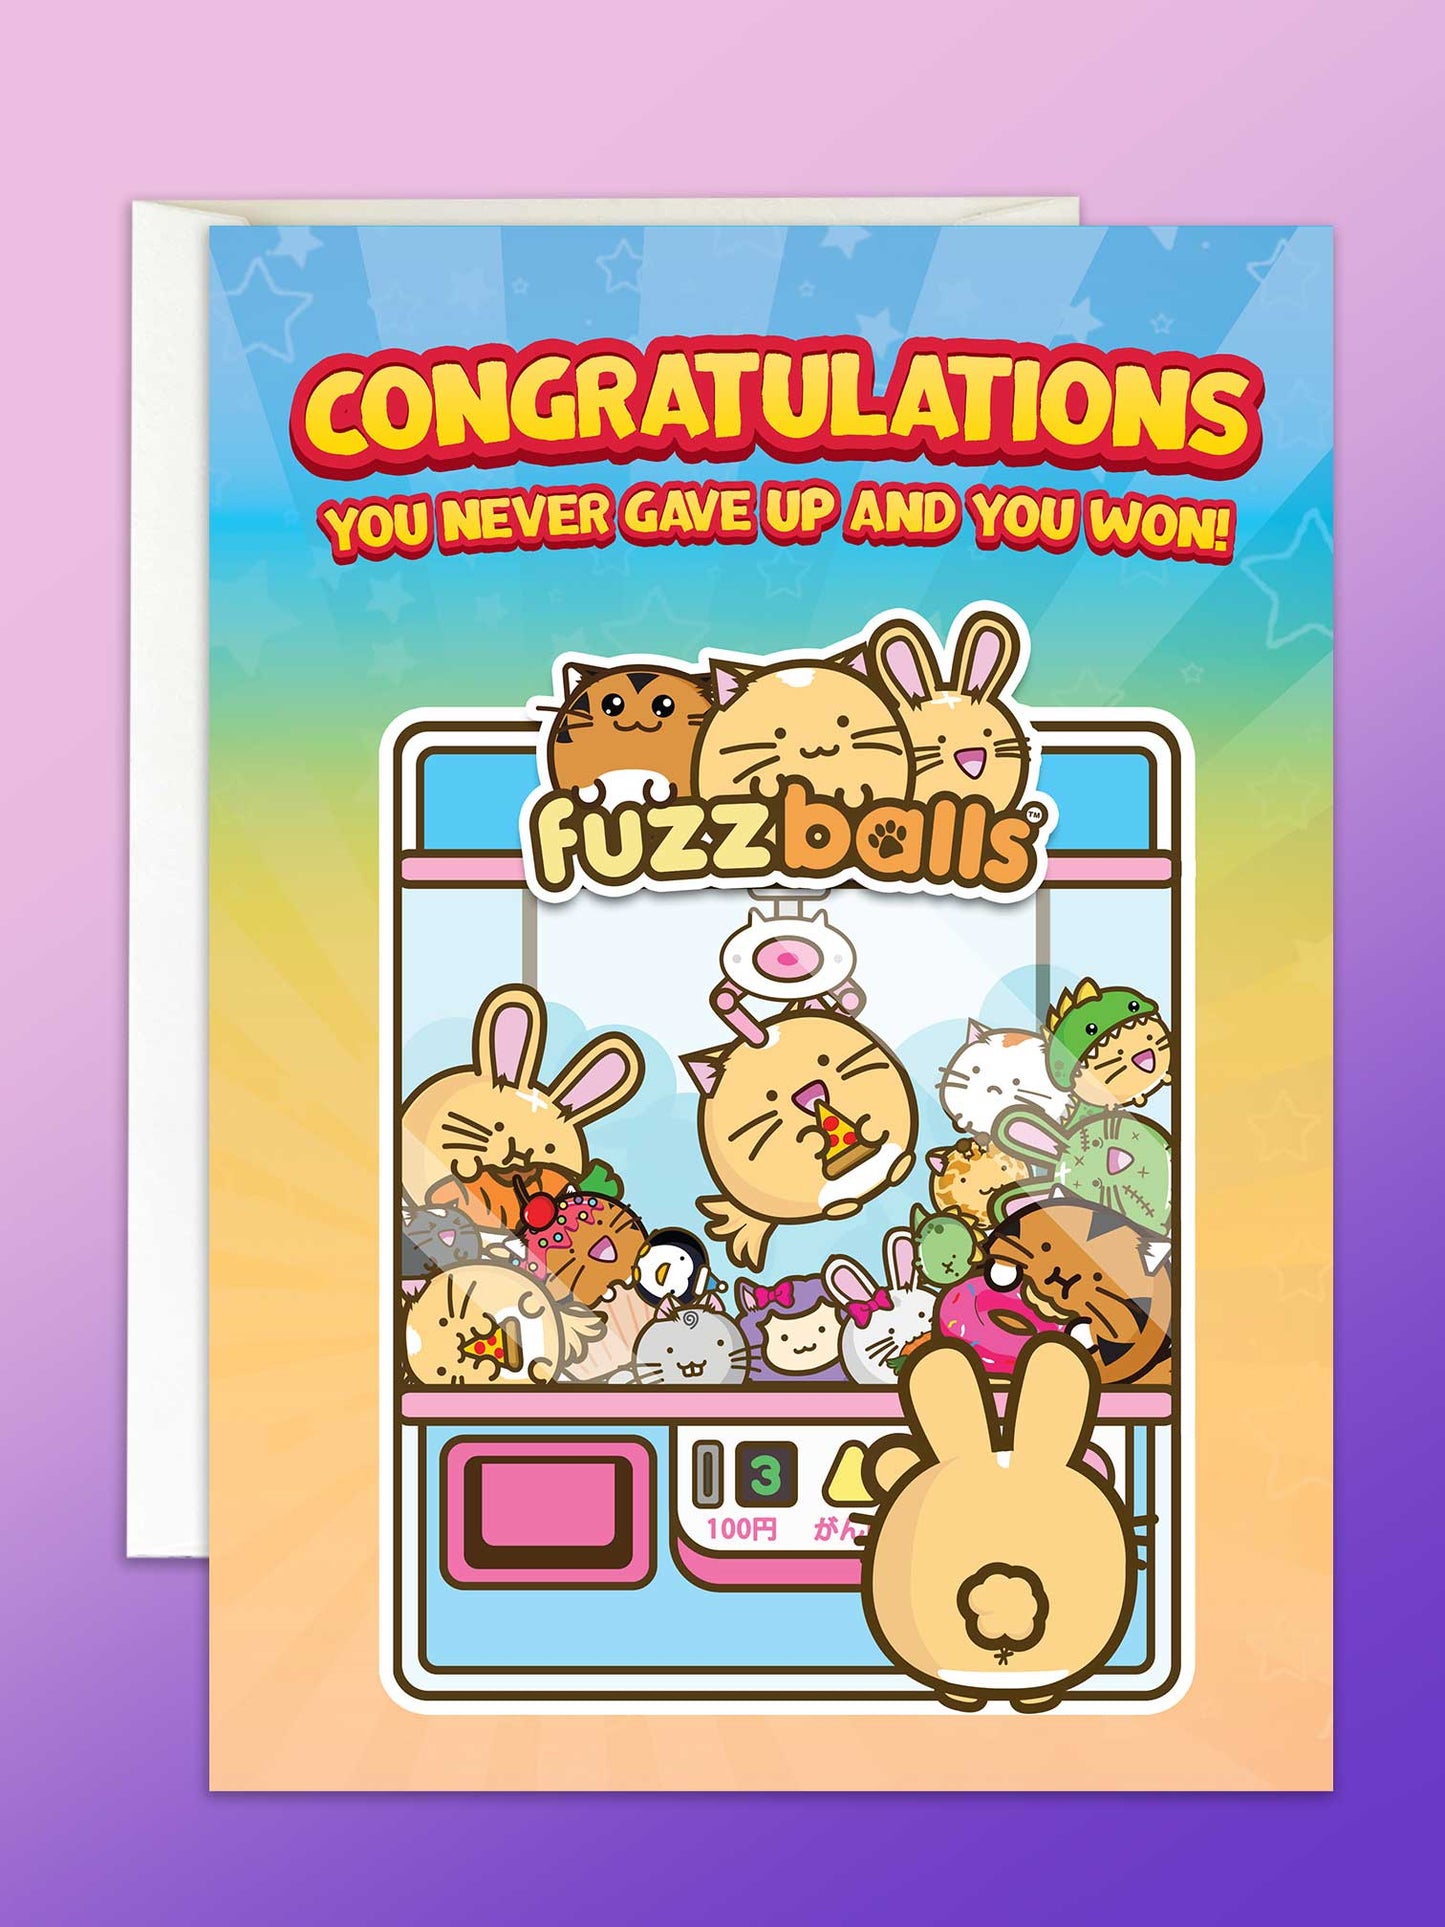 Congratulations You Never Gave Up And Won! Card